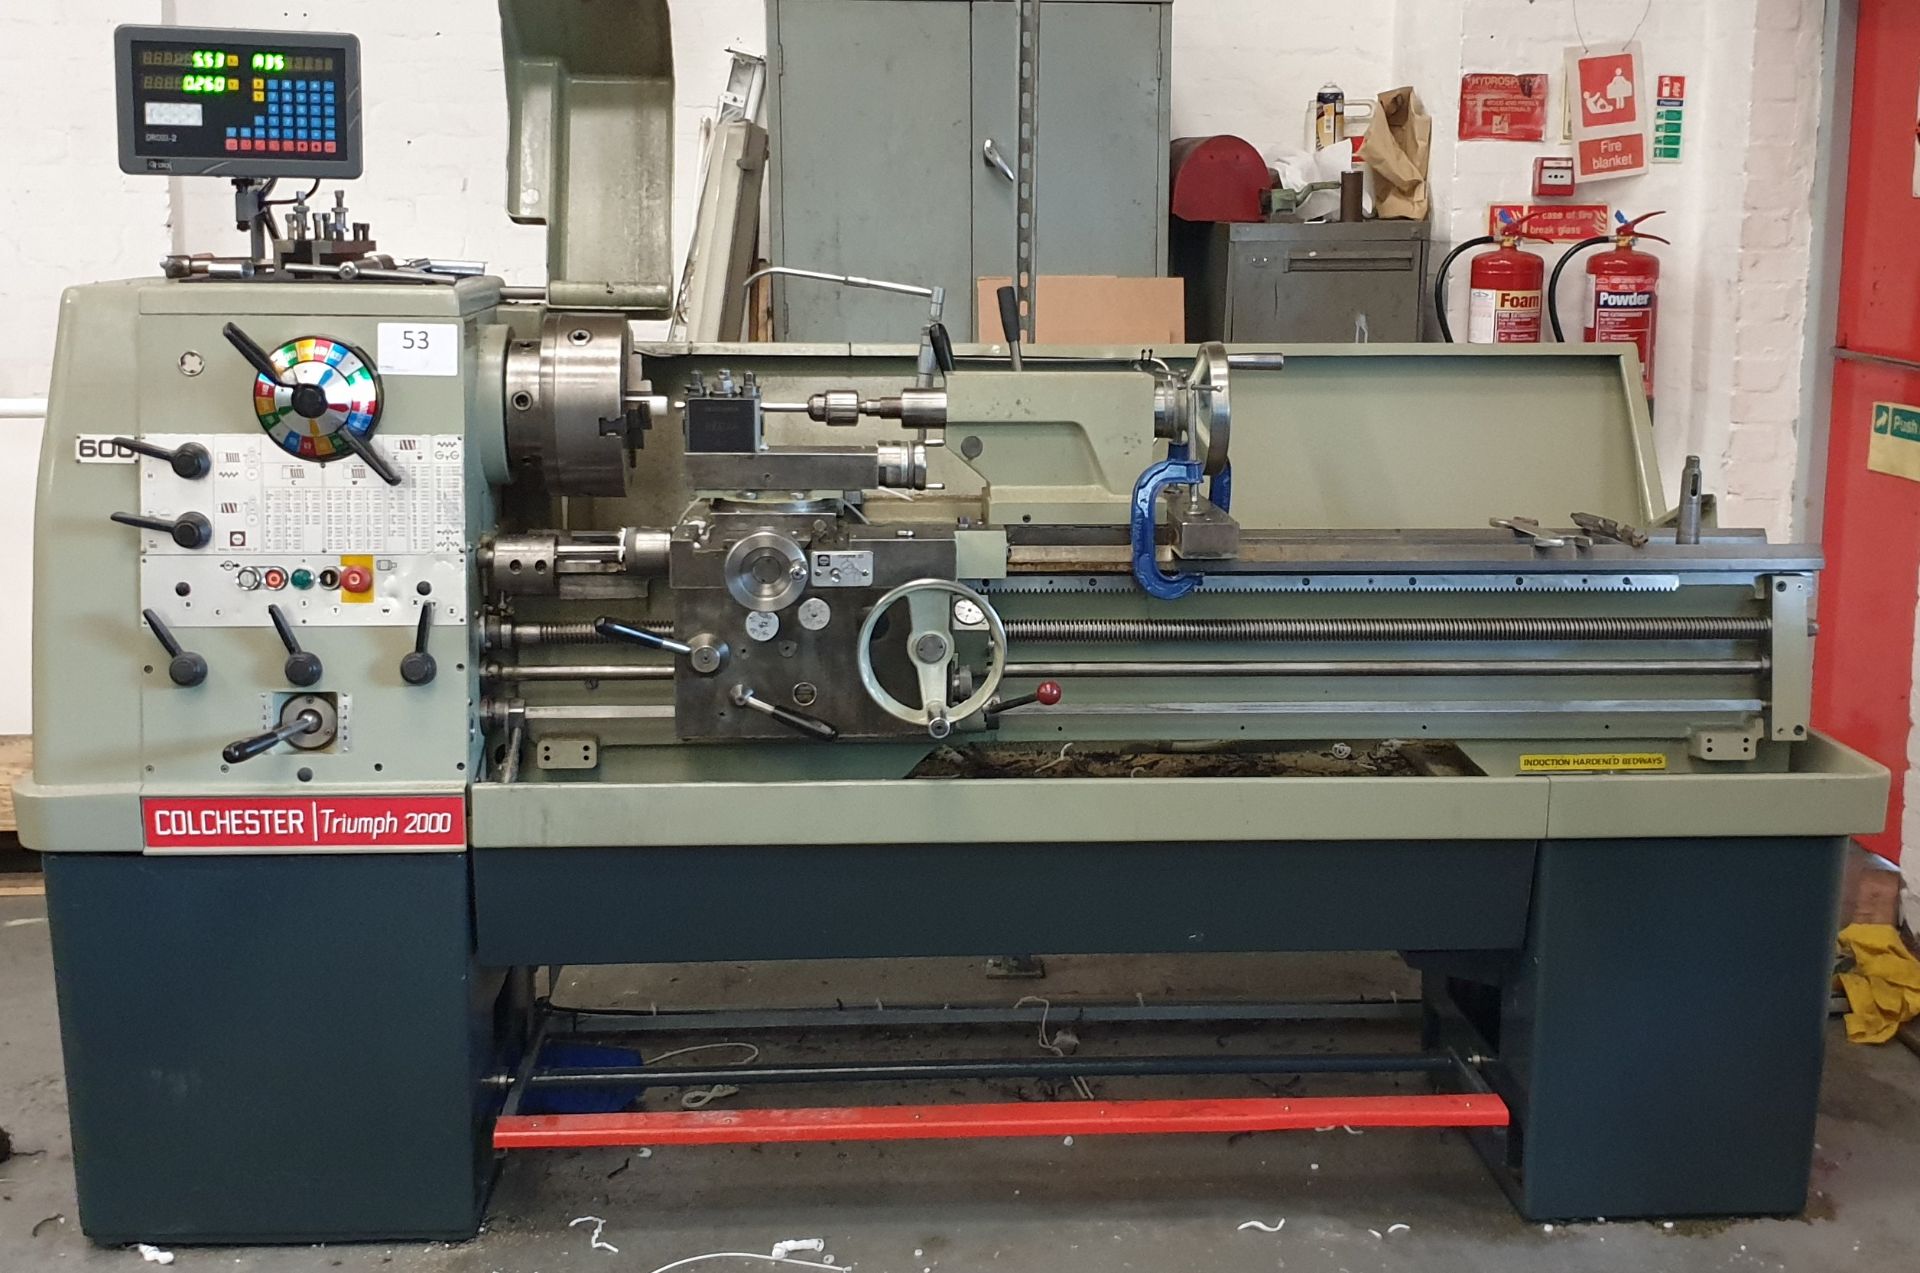 Colchester Triumph 2000, Gap Bed SS & SC Centre Lathe With a GT DRO3 two-axis Digital Read-out, Seri - Image 5 of 5